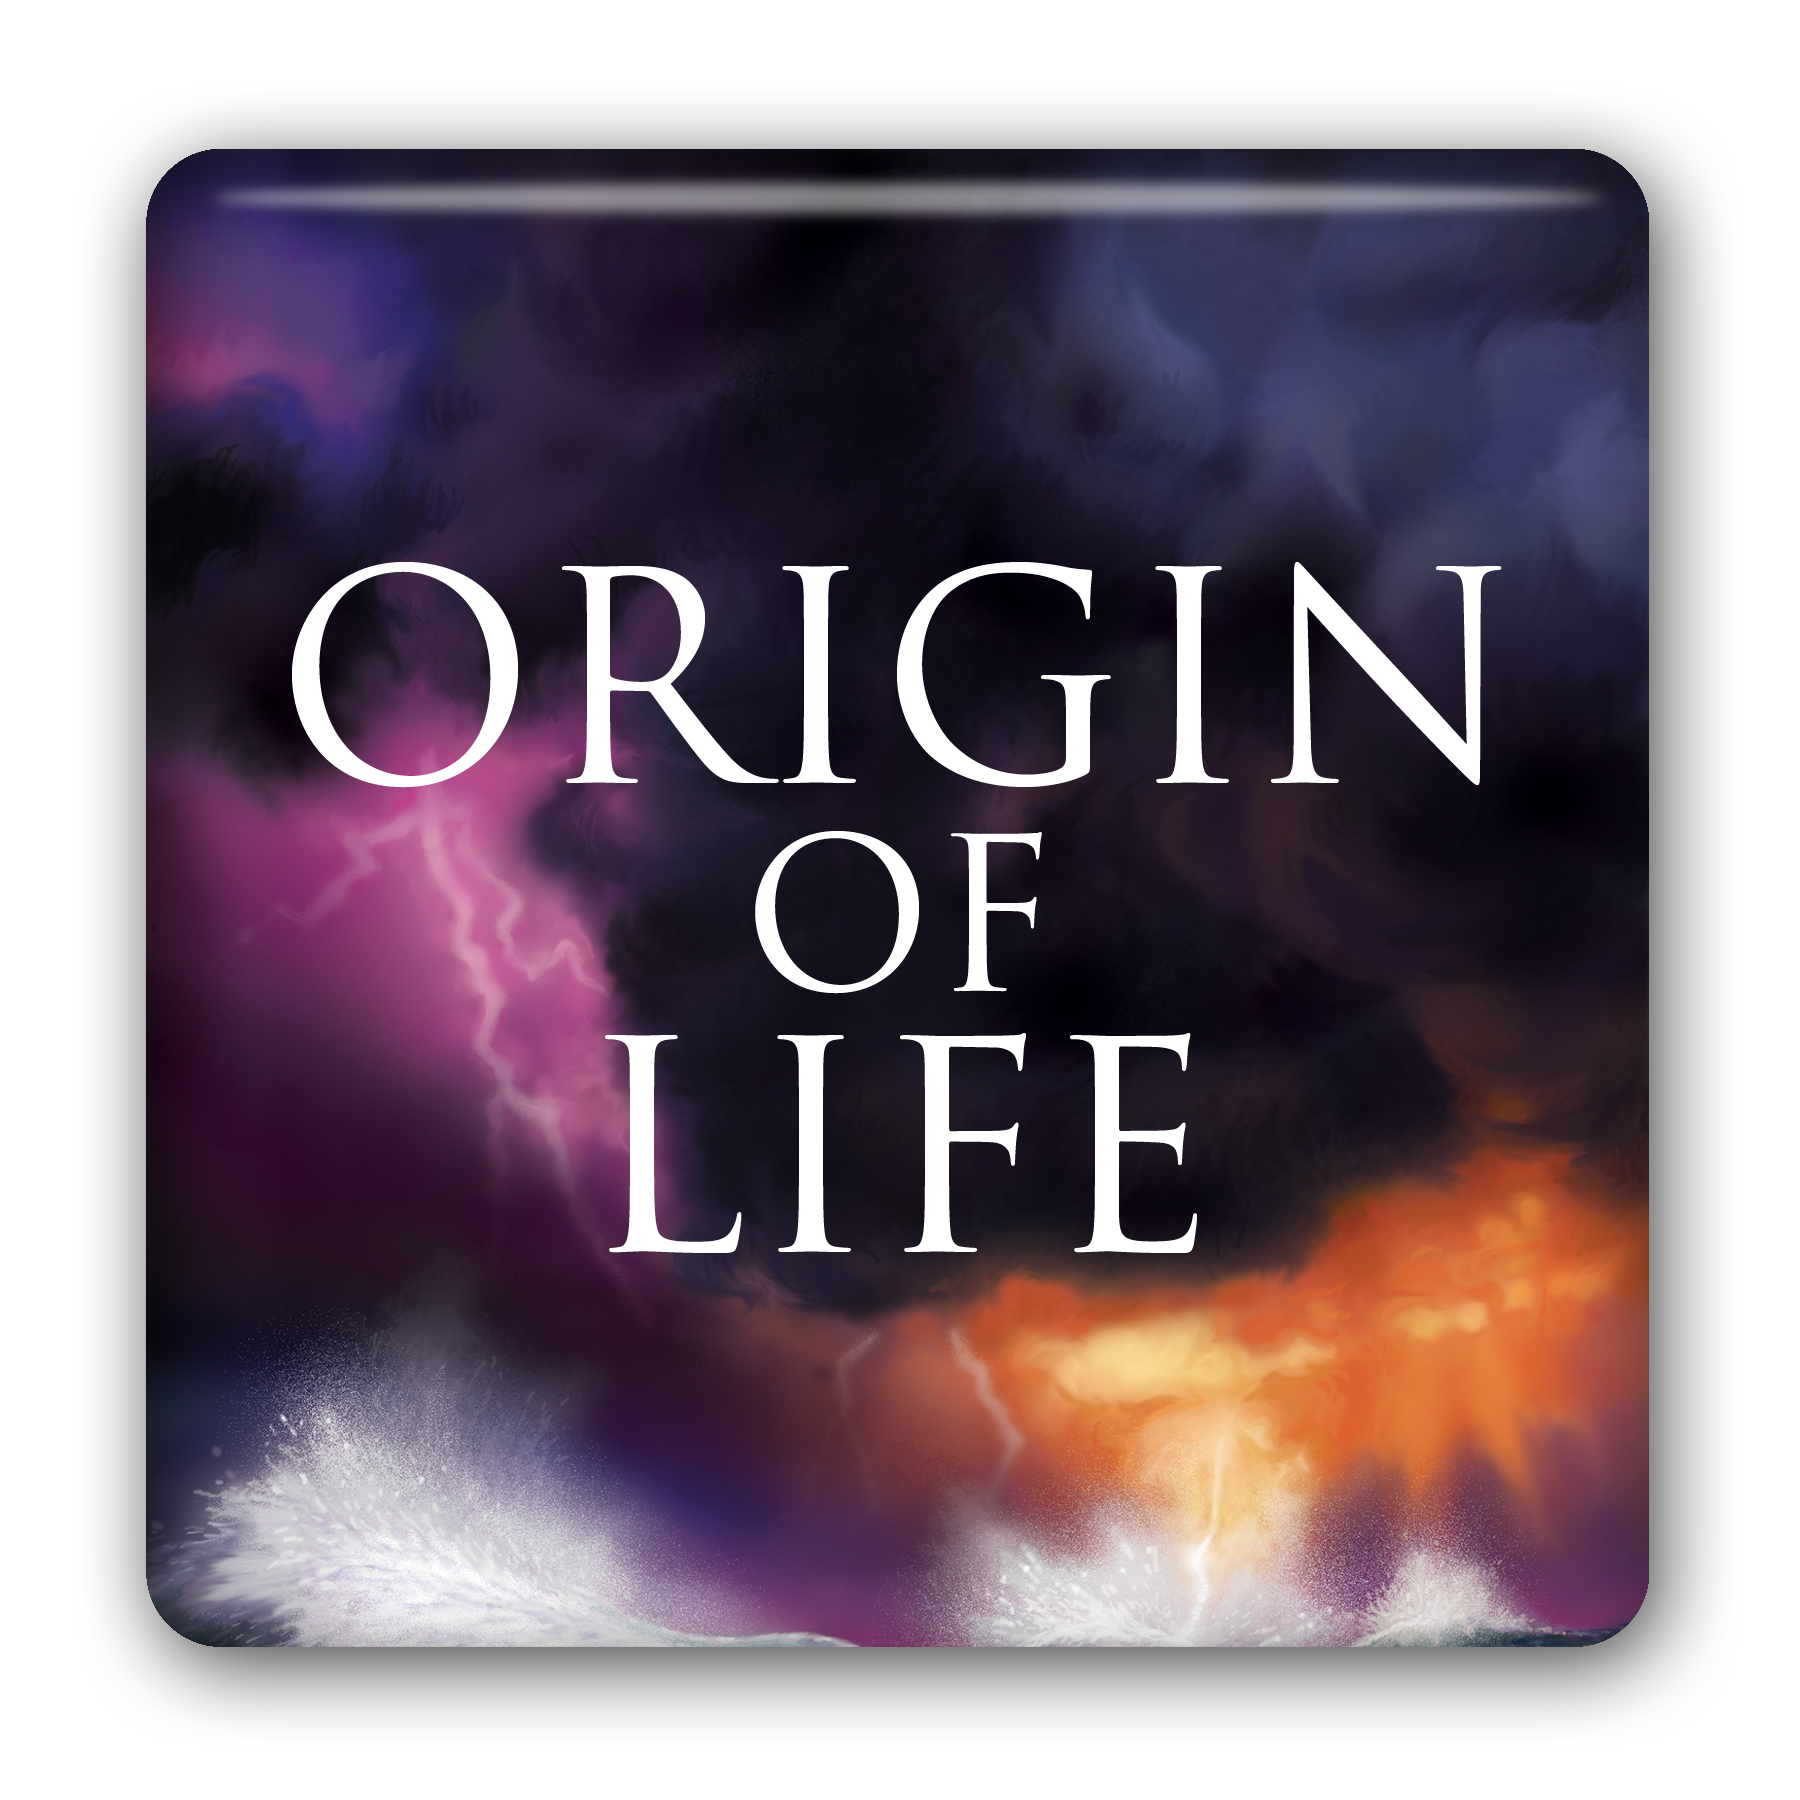 Adv. Seminar on the Origins of Life Course Material Package Image